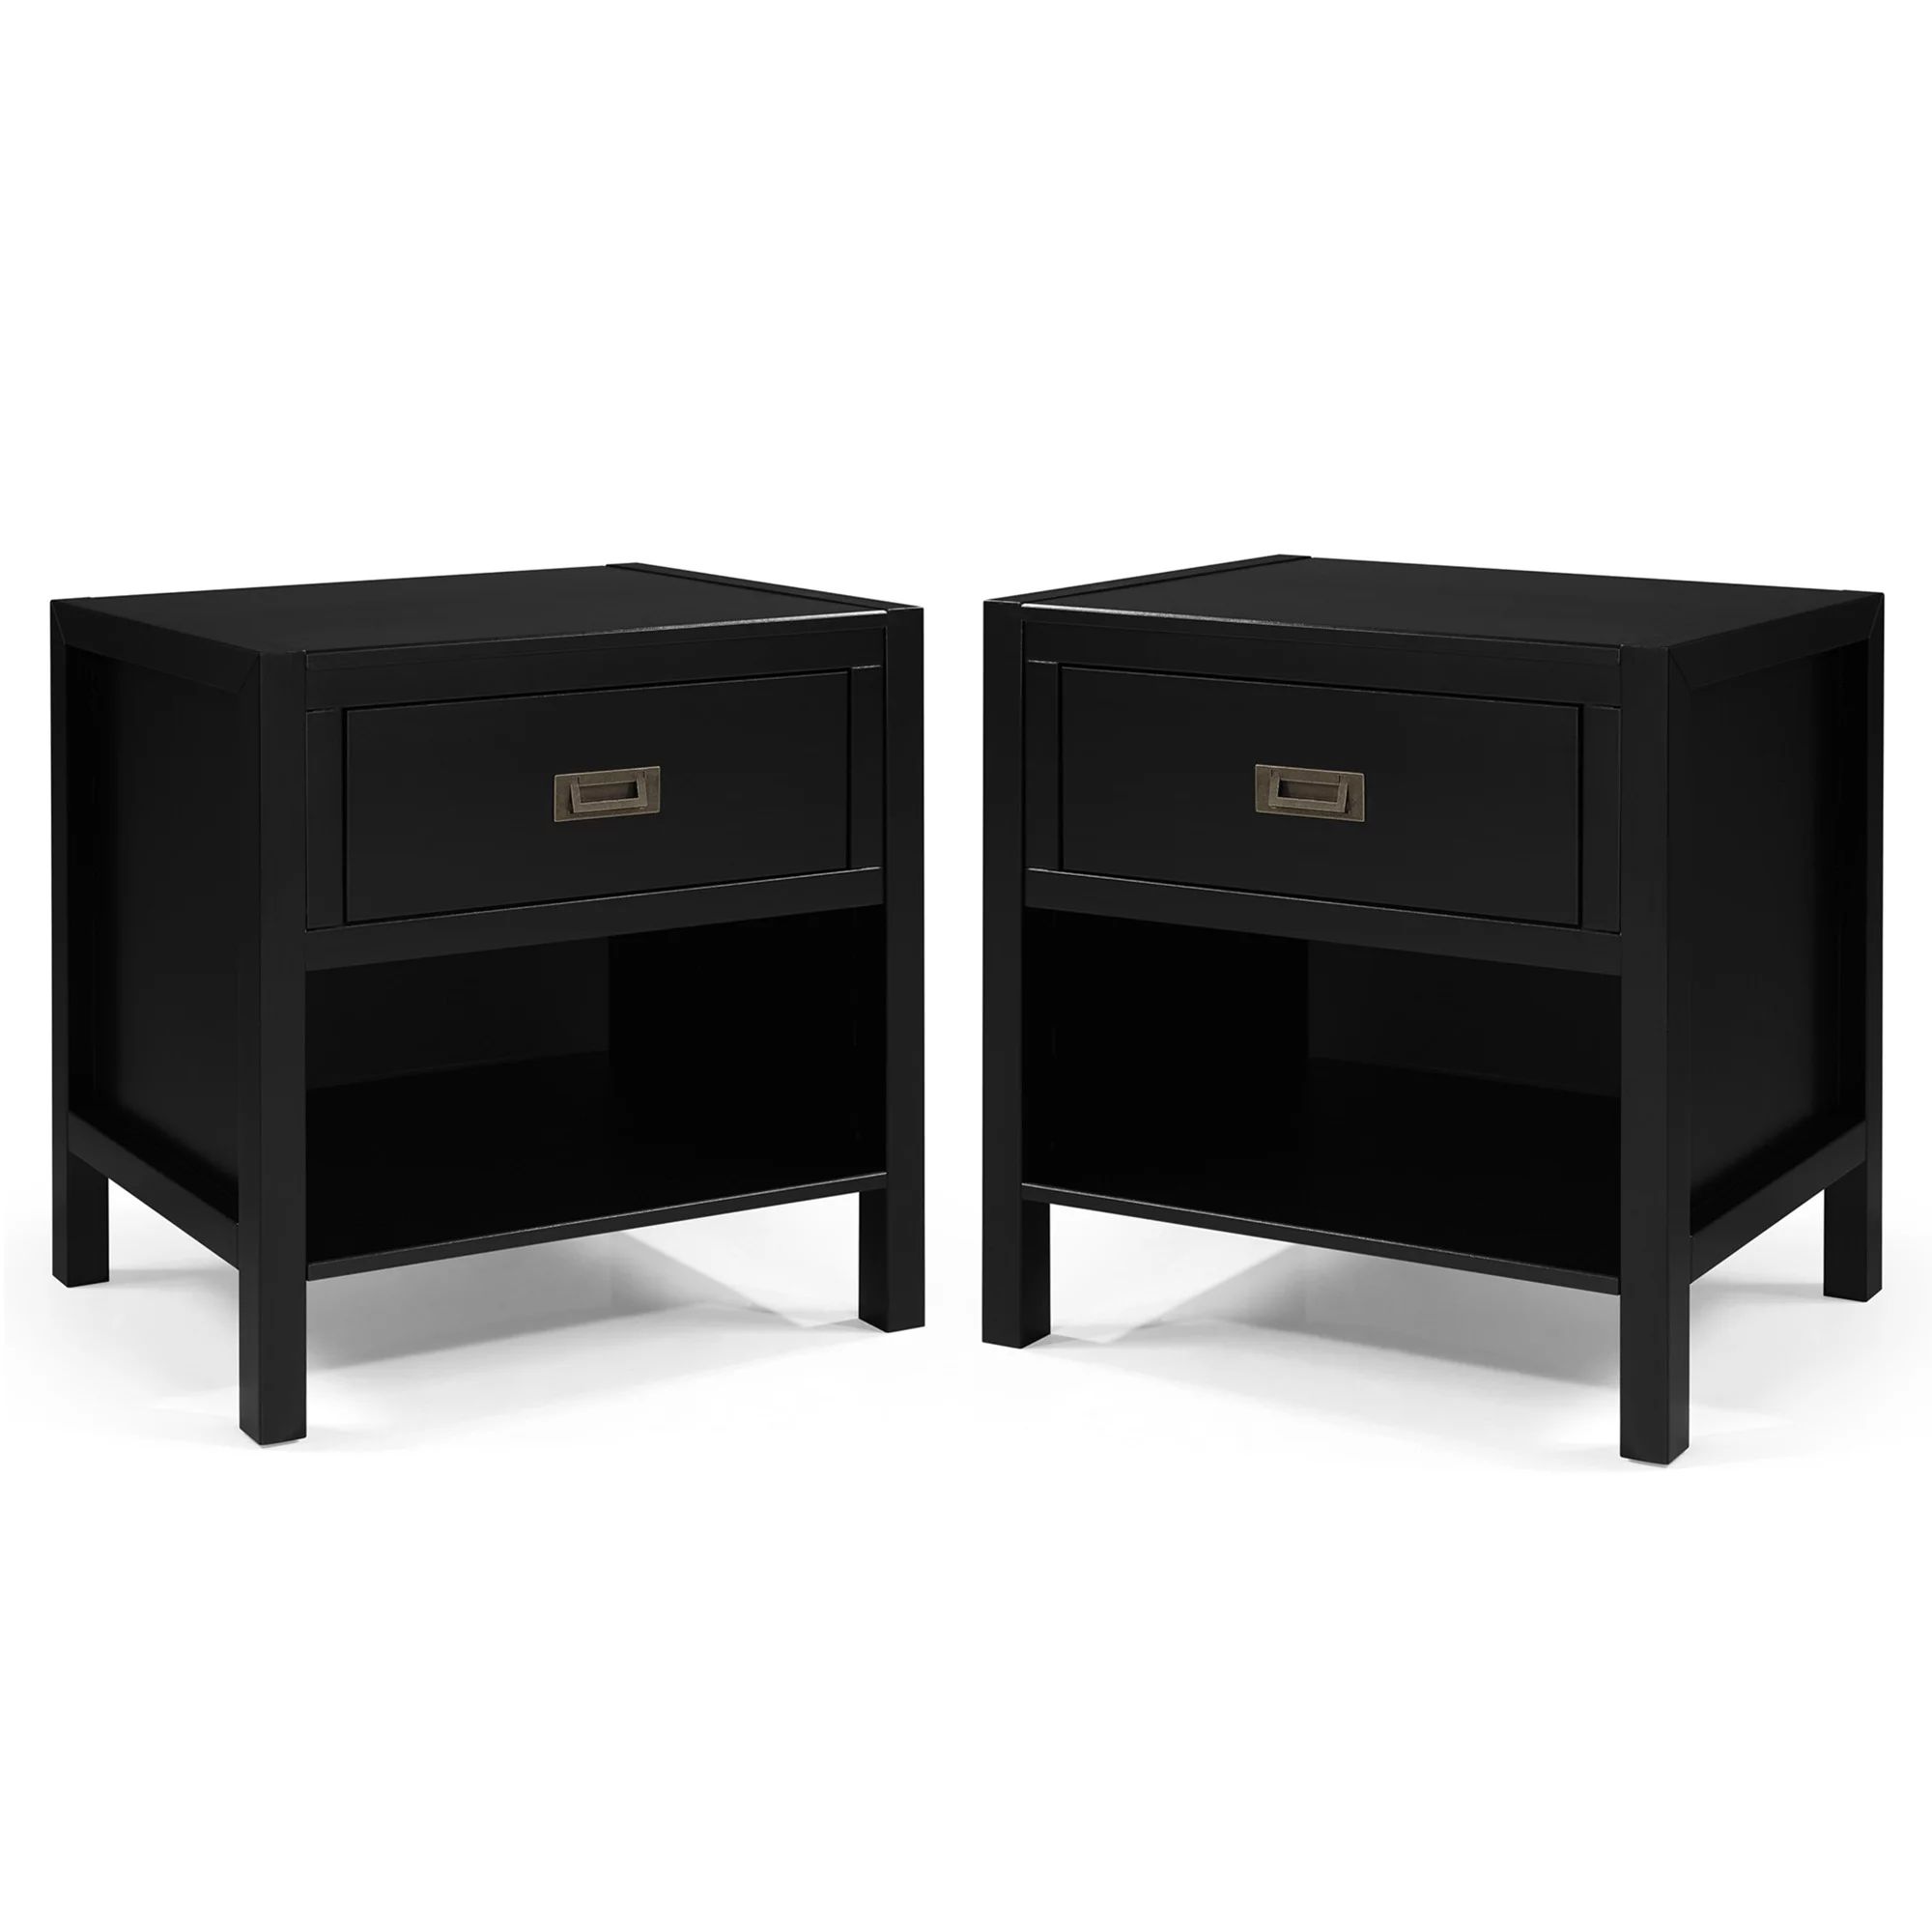 (Set of 2) Annabelle One Drawer Storage Nightstand by Chateau Lyon, Black | Walmart (US)